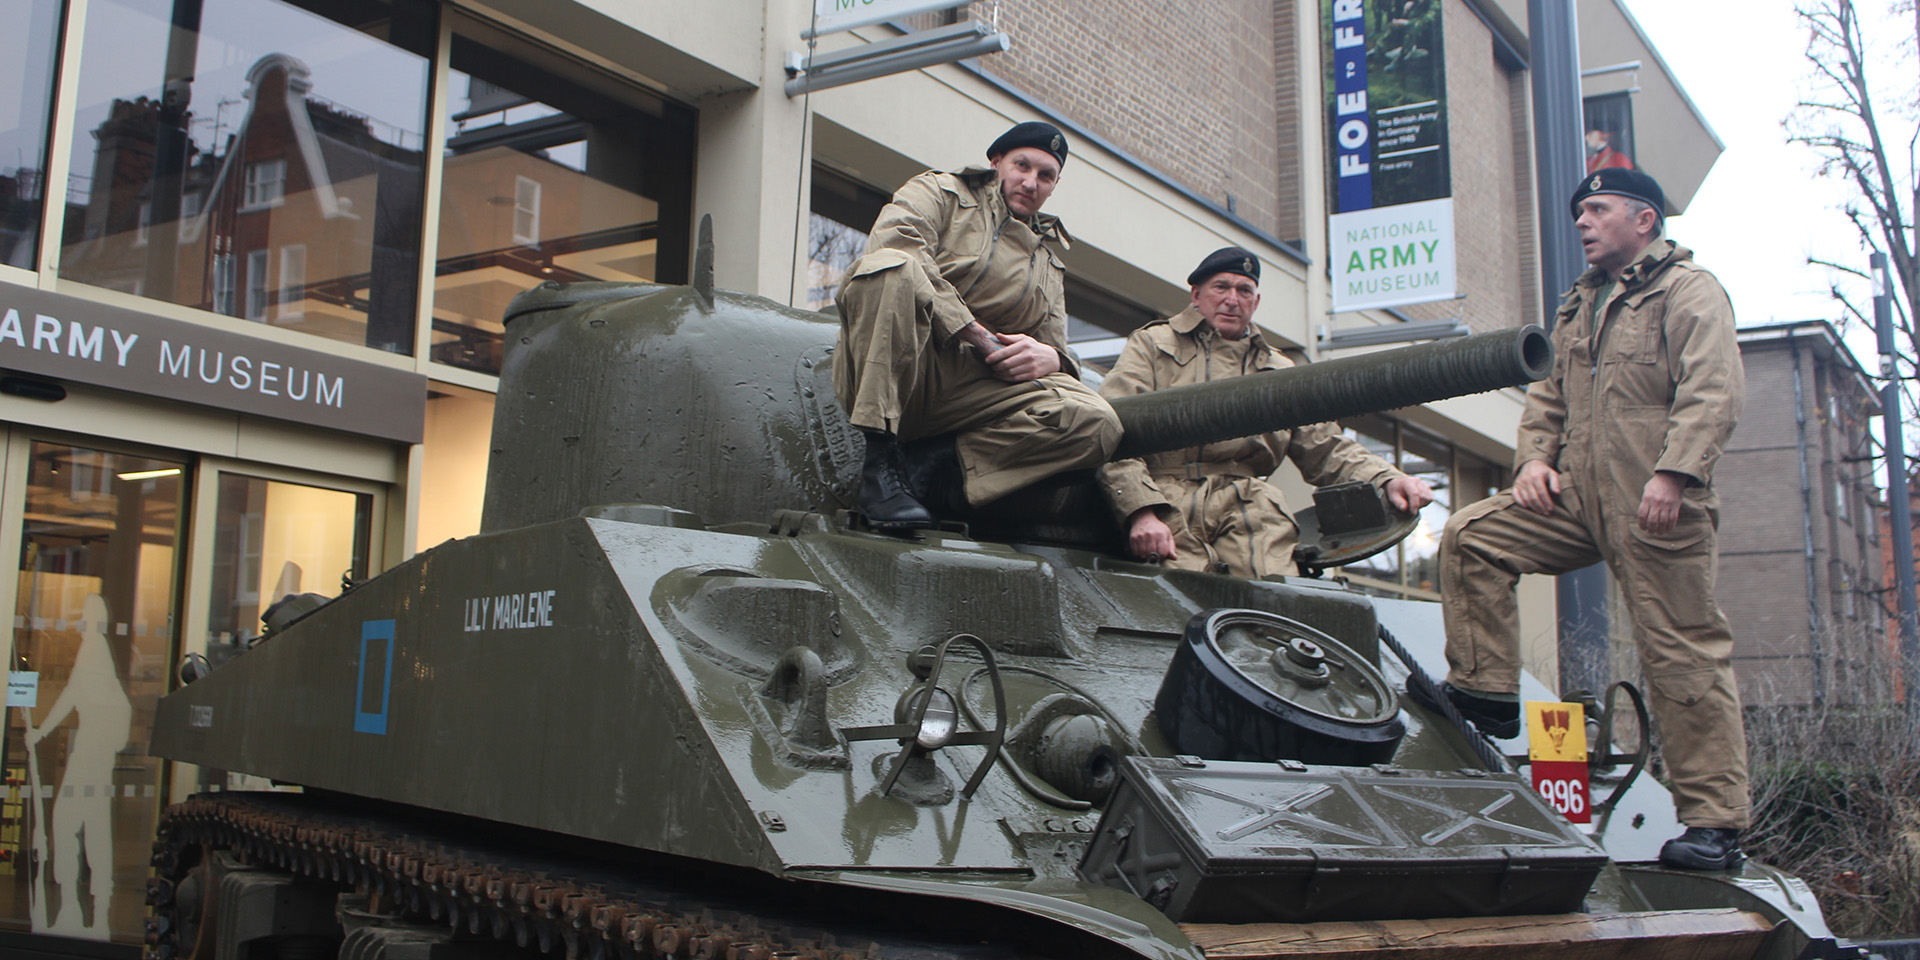 Second World War living historians on a Sherman tank outside the National Army Museum